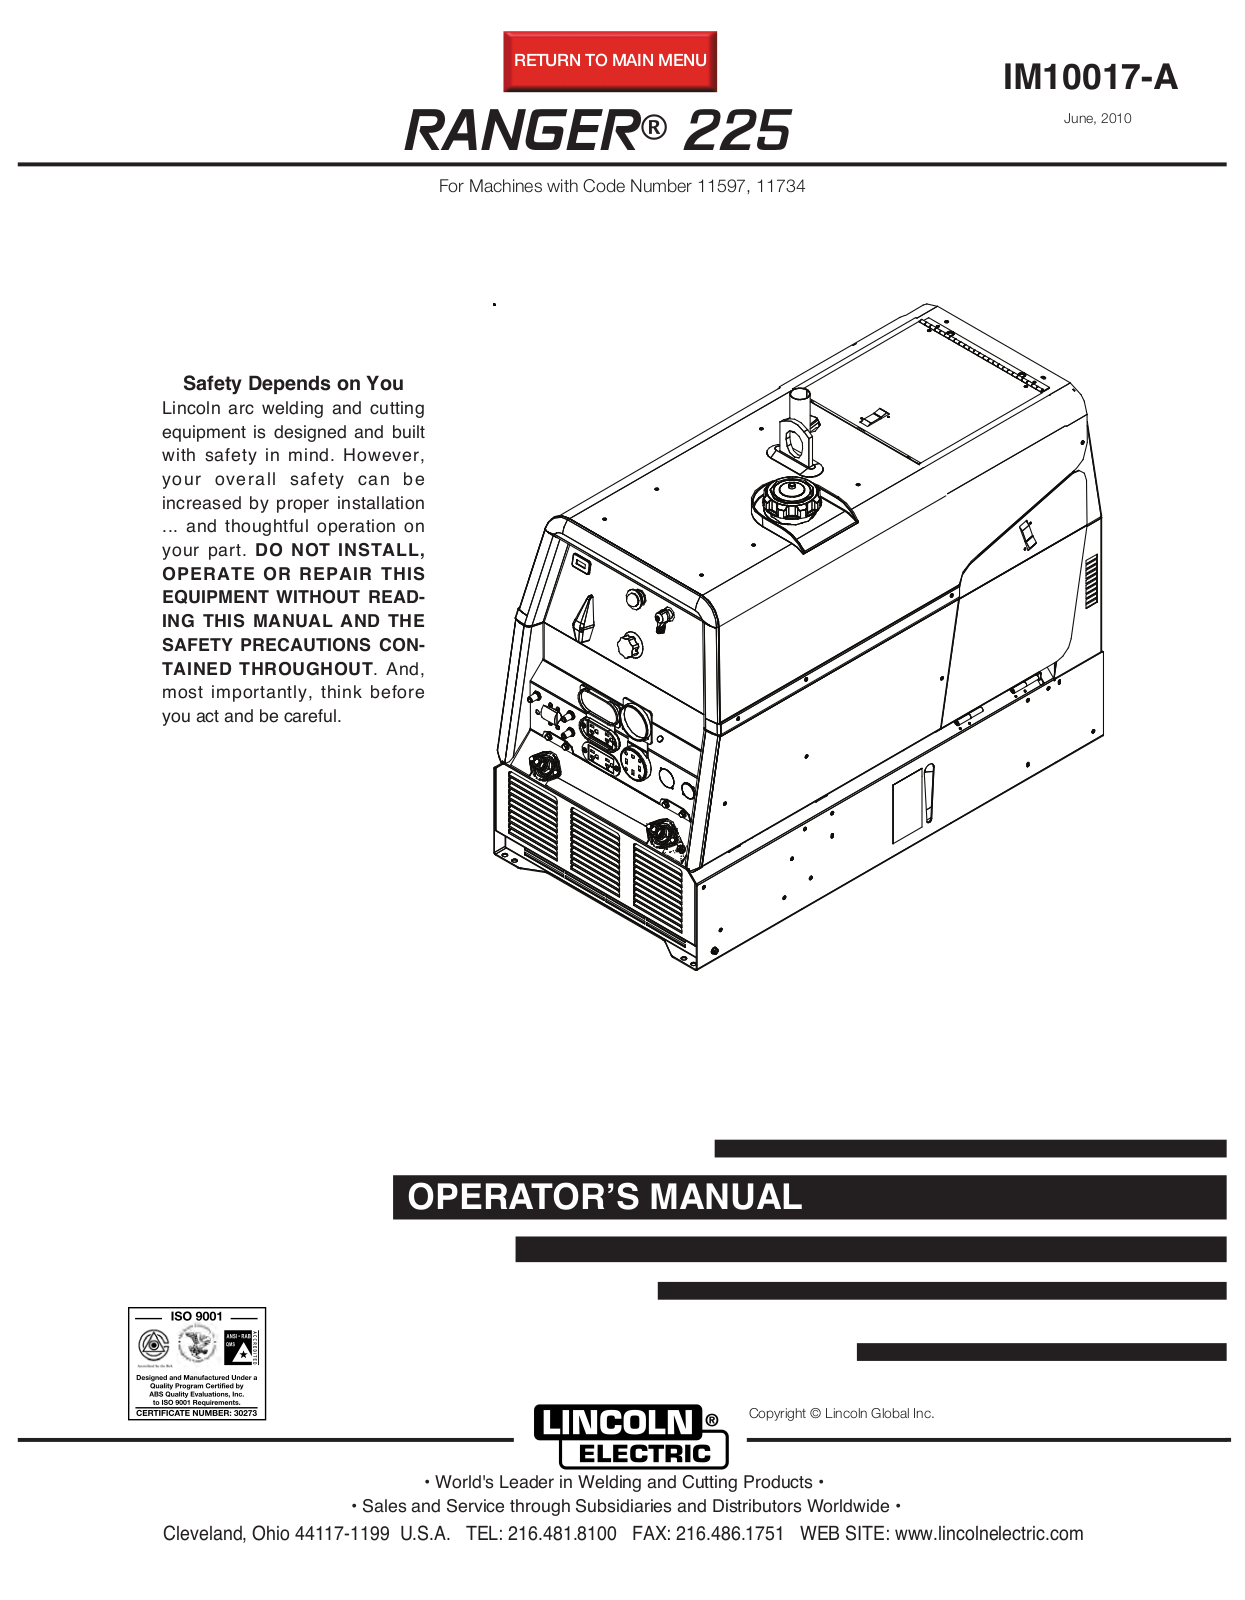 Lincoln Electric RANGER 225 User Manual